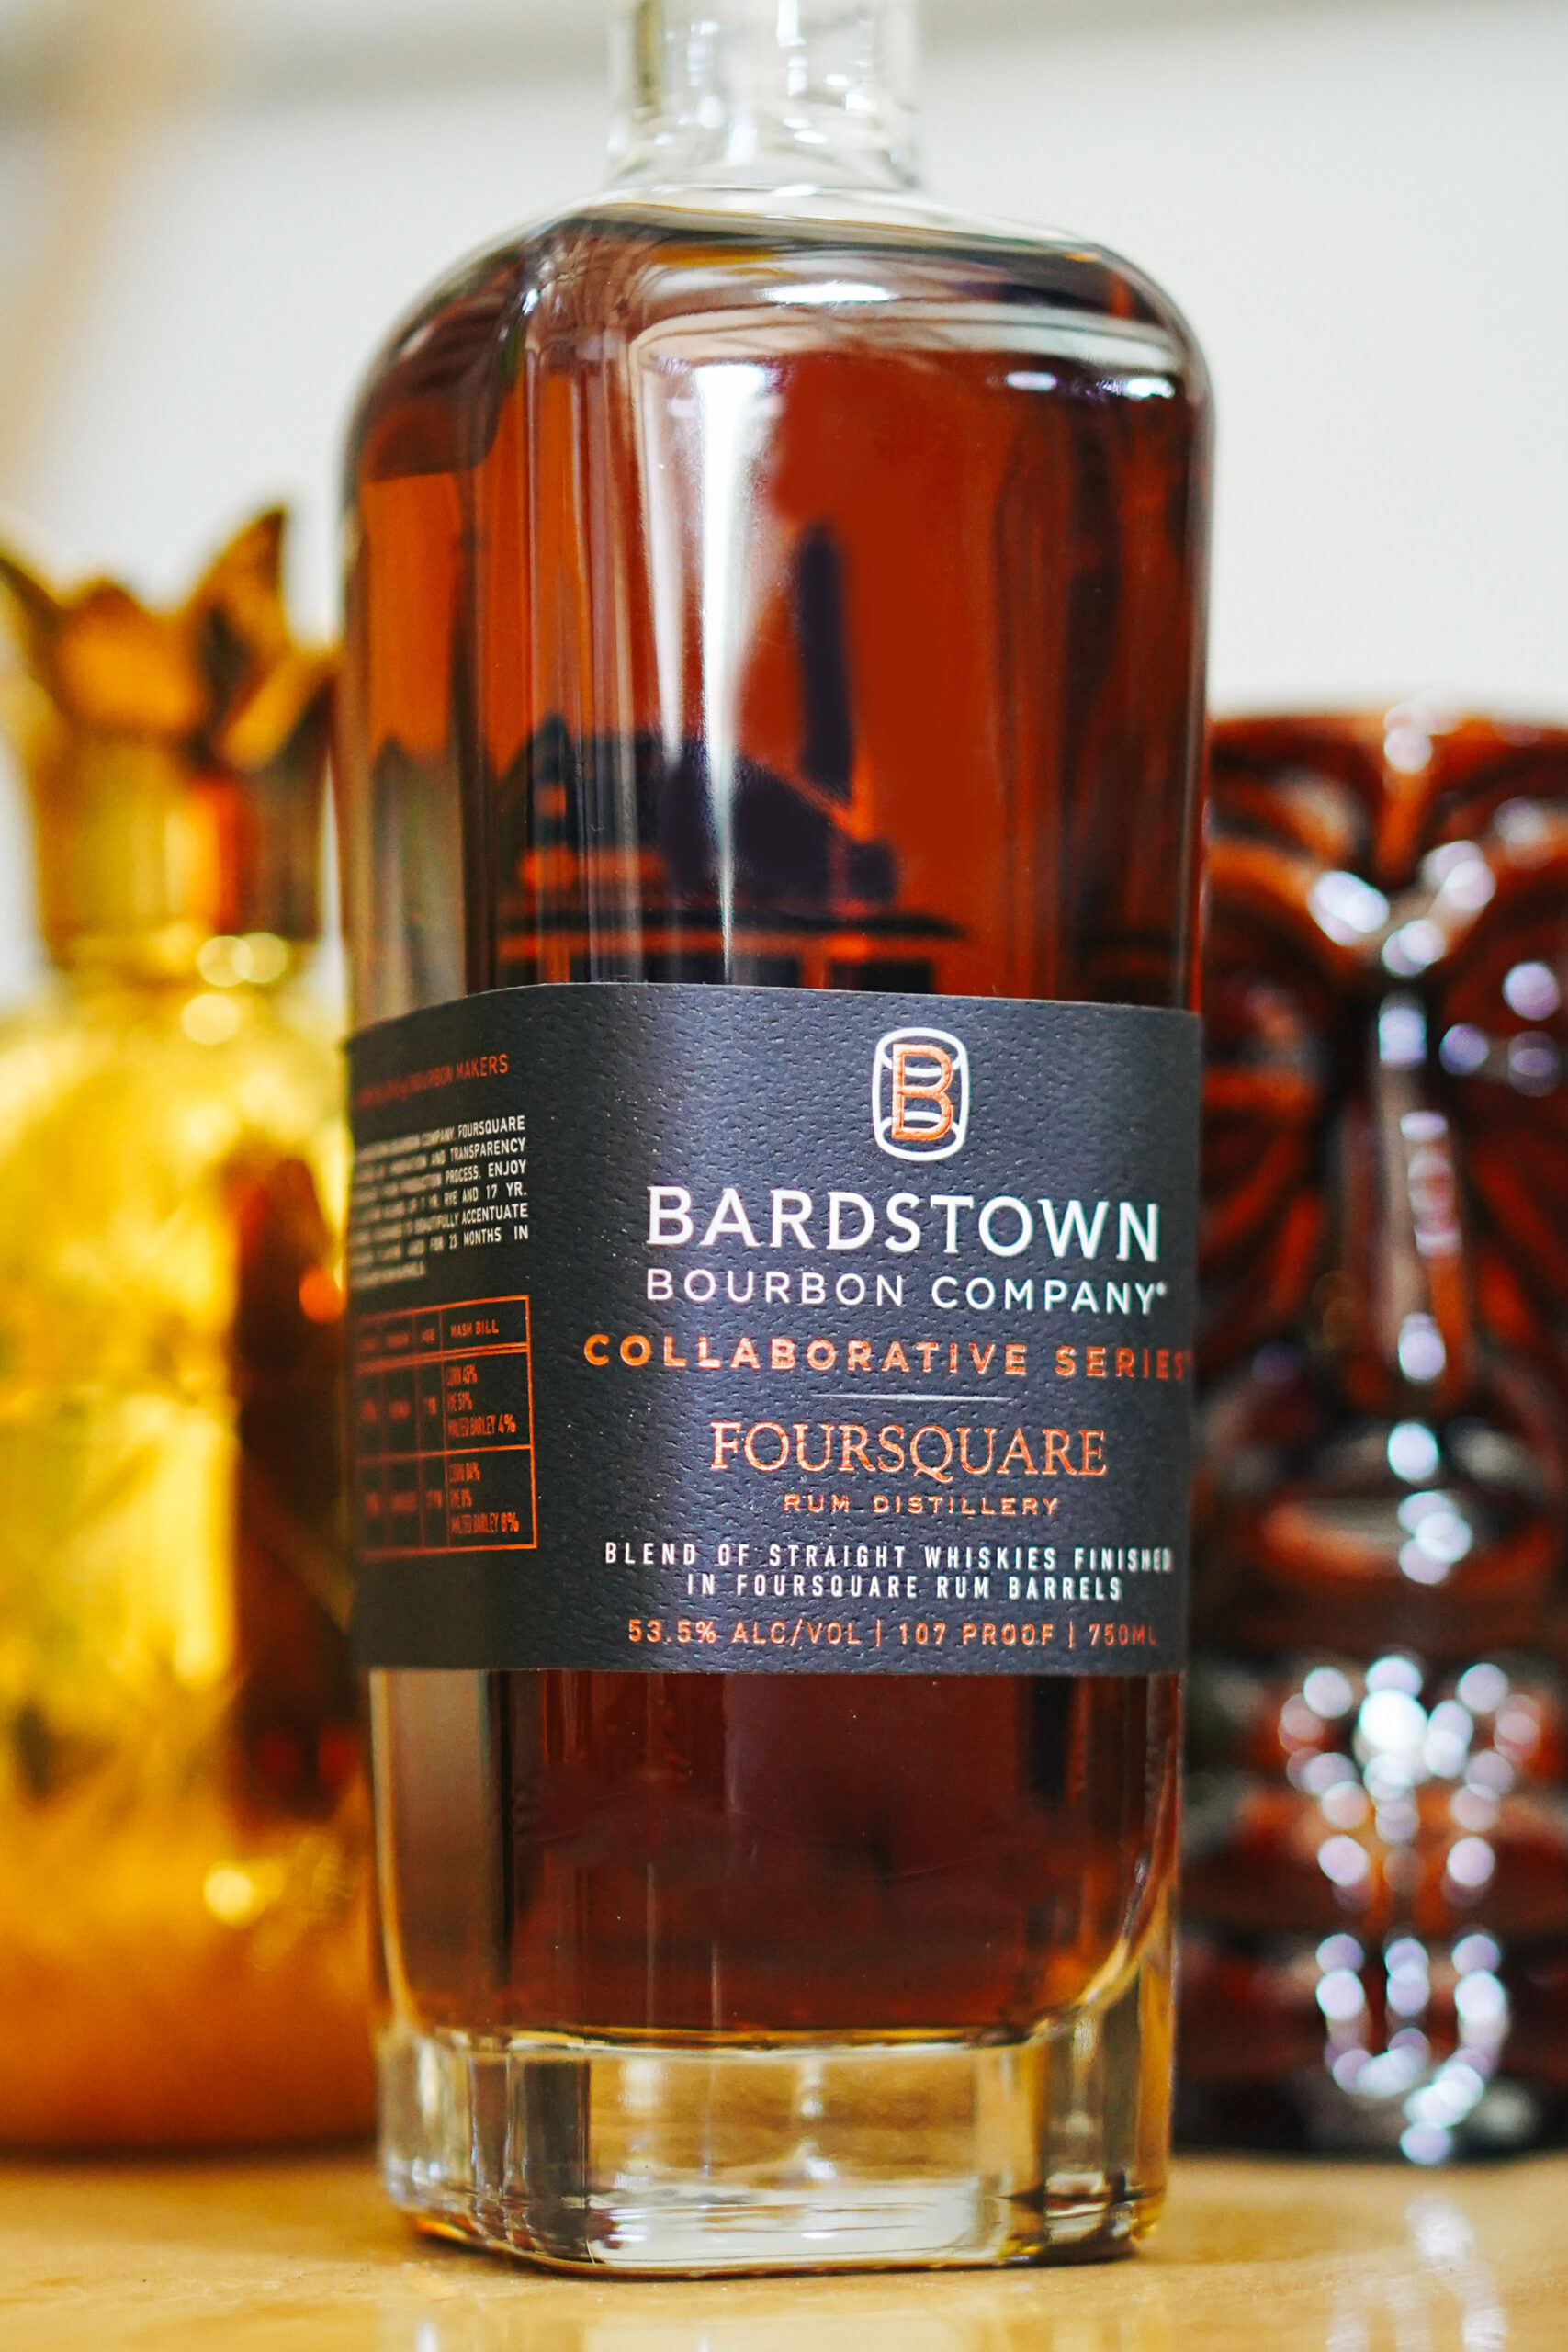 New: Bardstown Bourbon Company Showcases Rum In Latest Collaboration